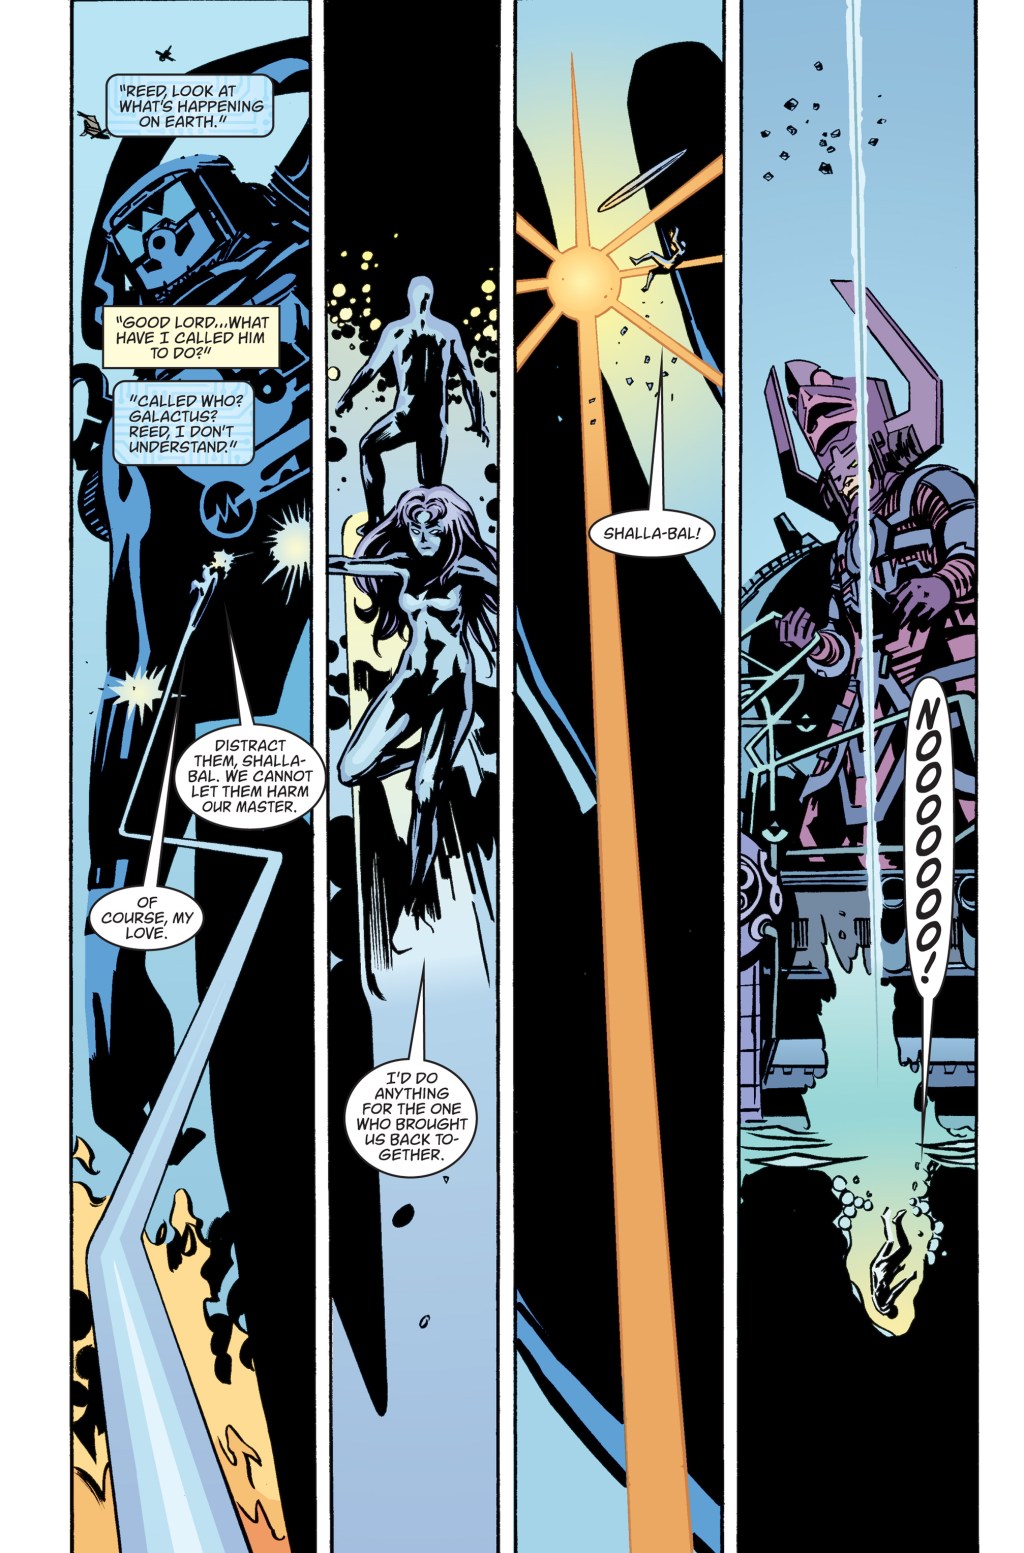 Shalla-Bal falls in battle in Earth X Vol. 1 #X "Earth X, Chapter X" (2000), Marvel Comics. Words by Jim Krueger and Alex Ross, art by John Paul Leon, Bill Reinhold, Melissa Edwards, and Todd Klein.